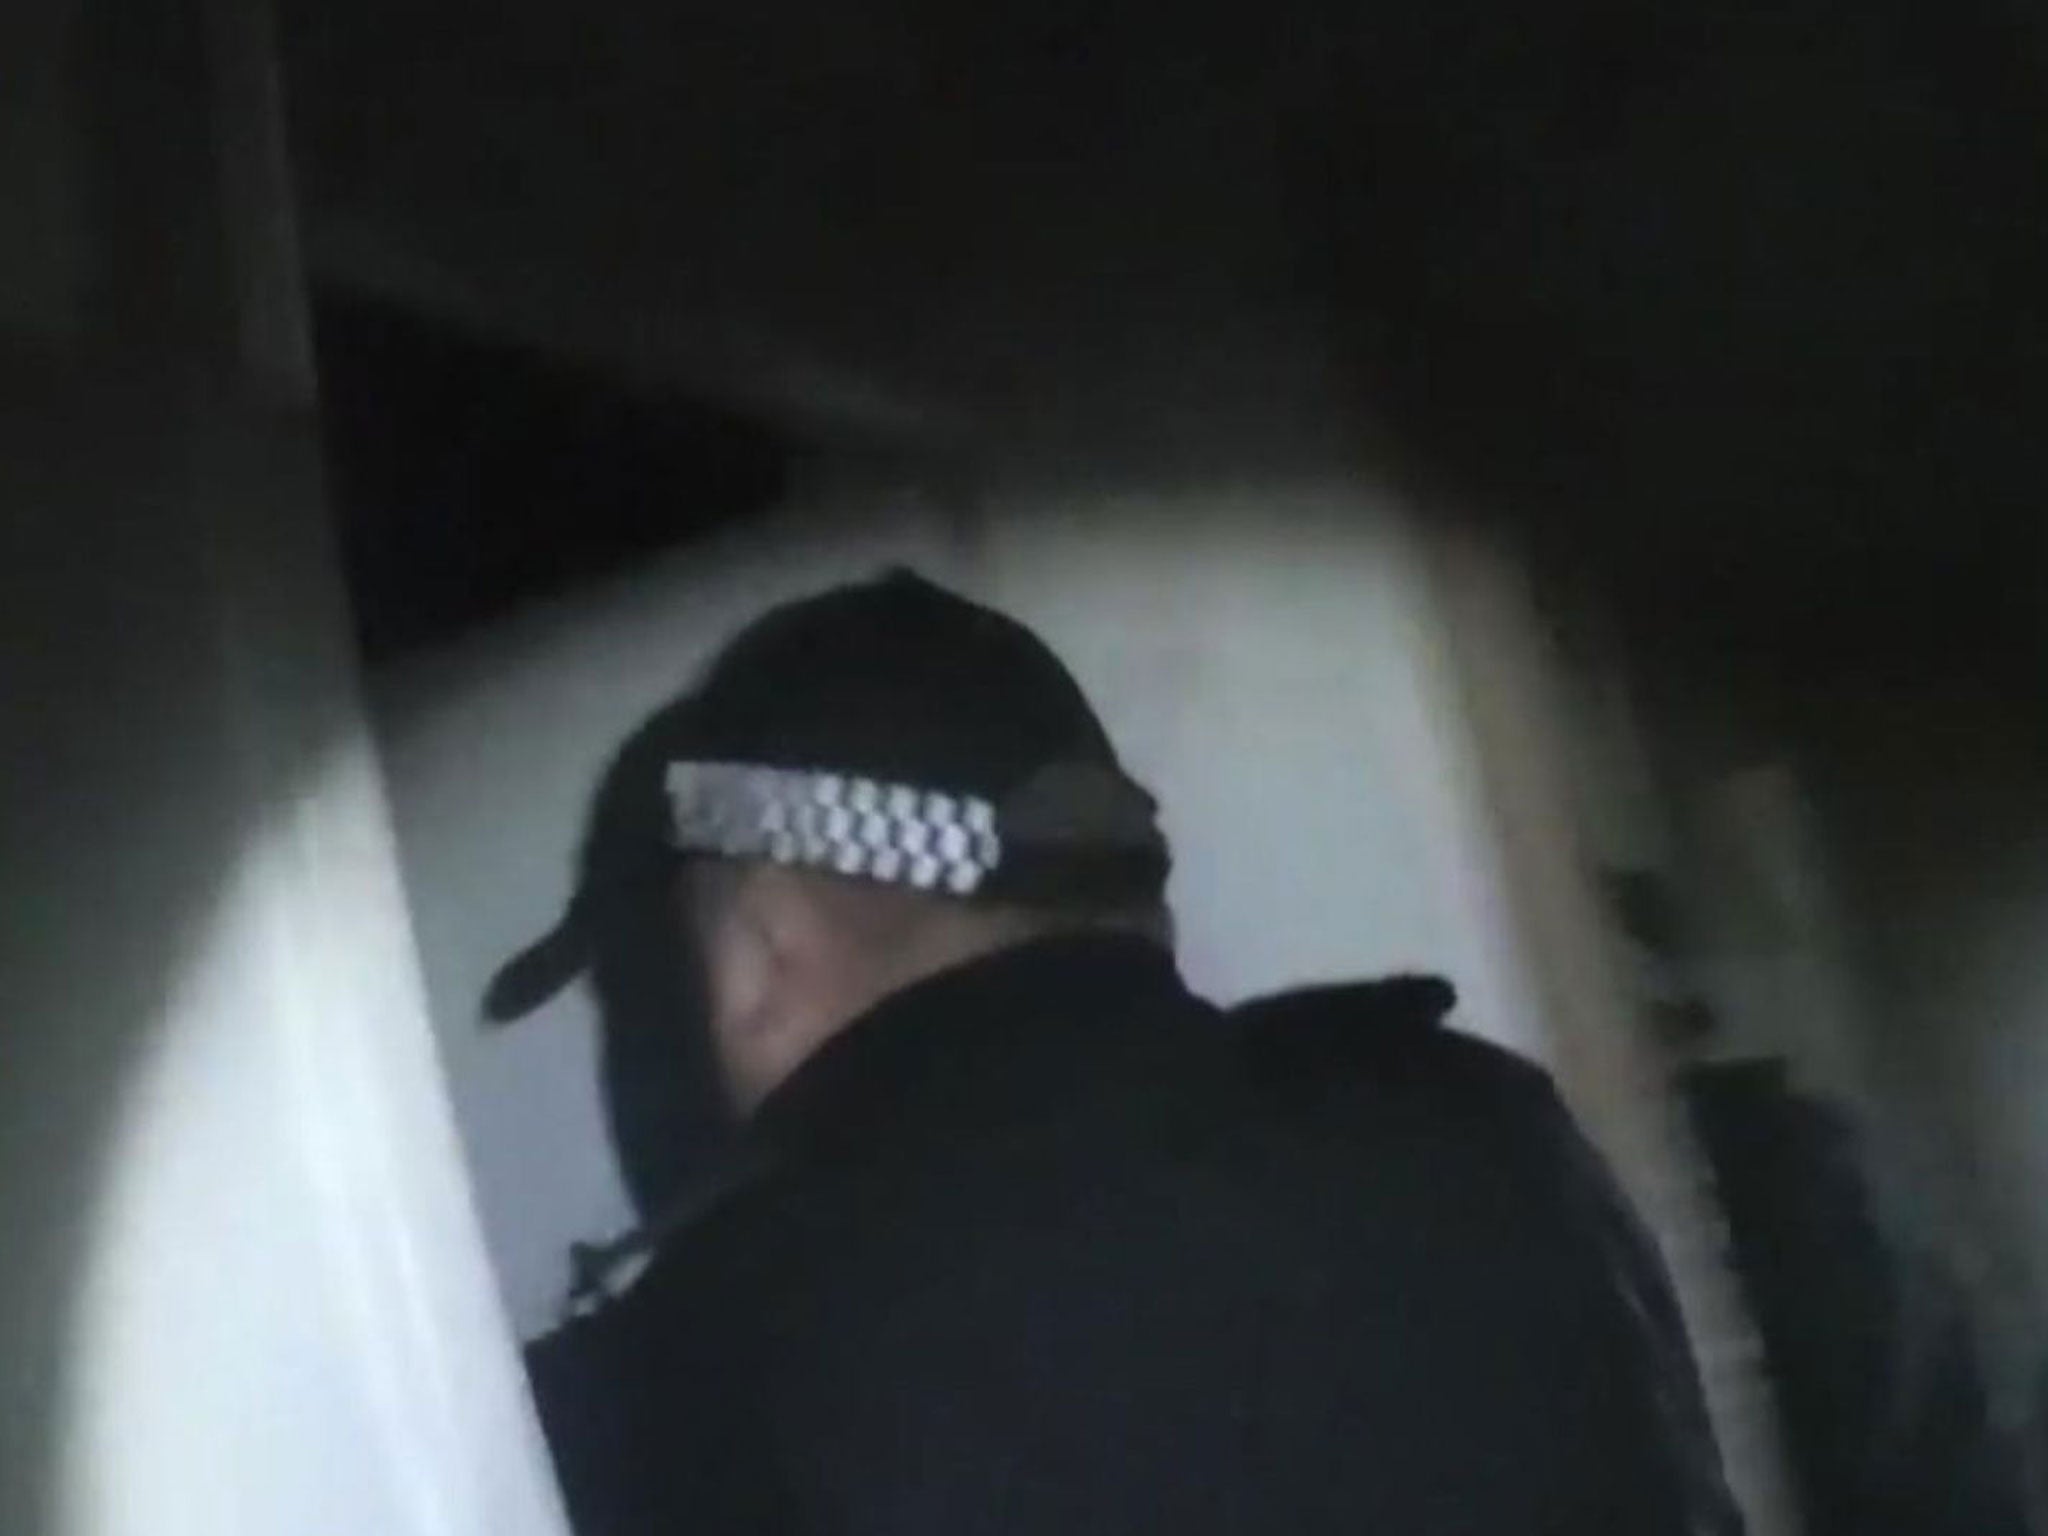 Police officers in Kent carry out a raid on a drug gang suspect’s property